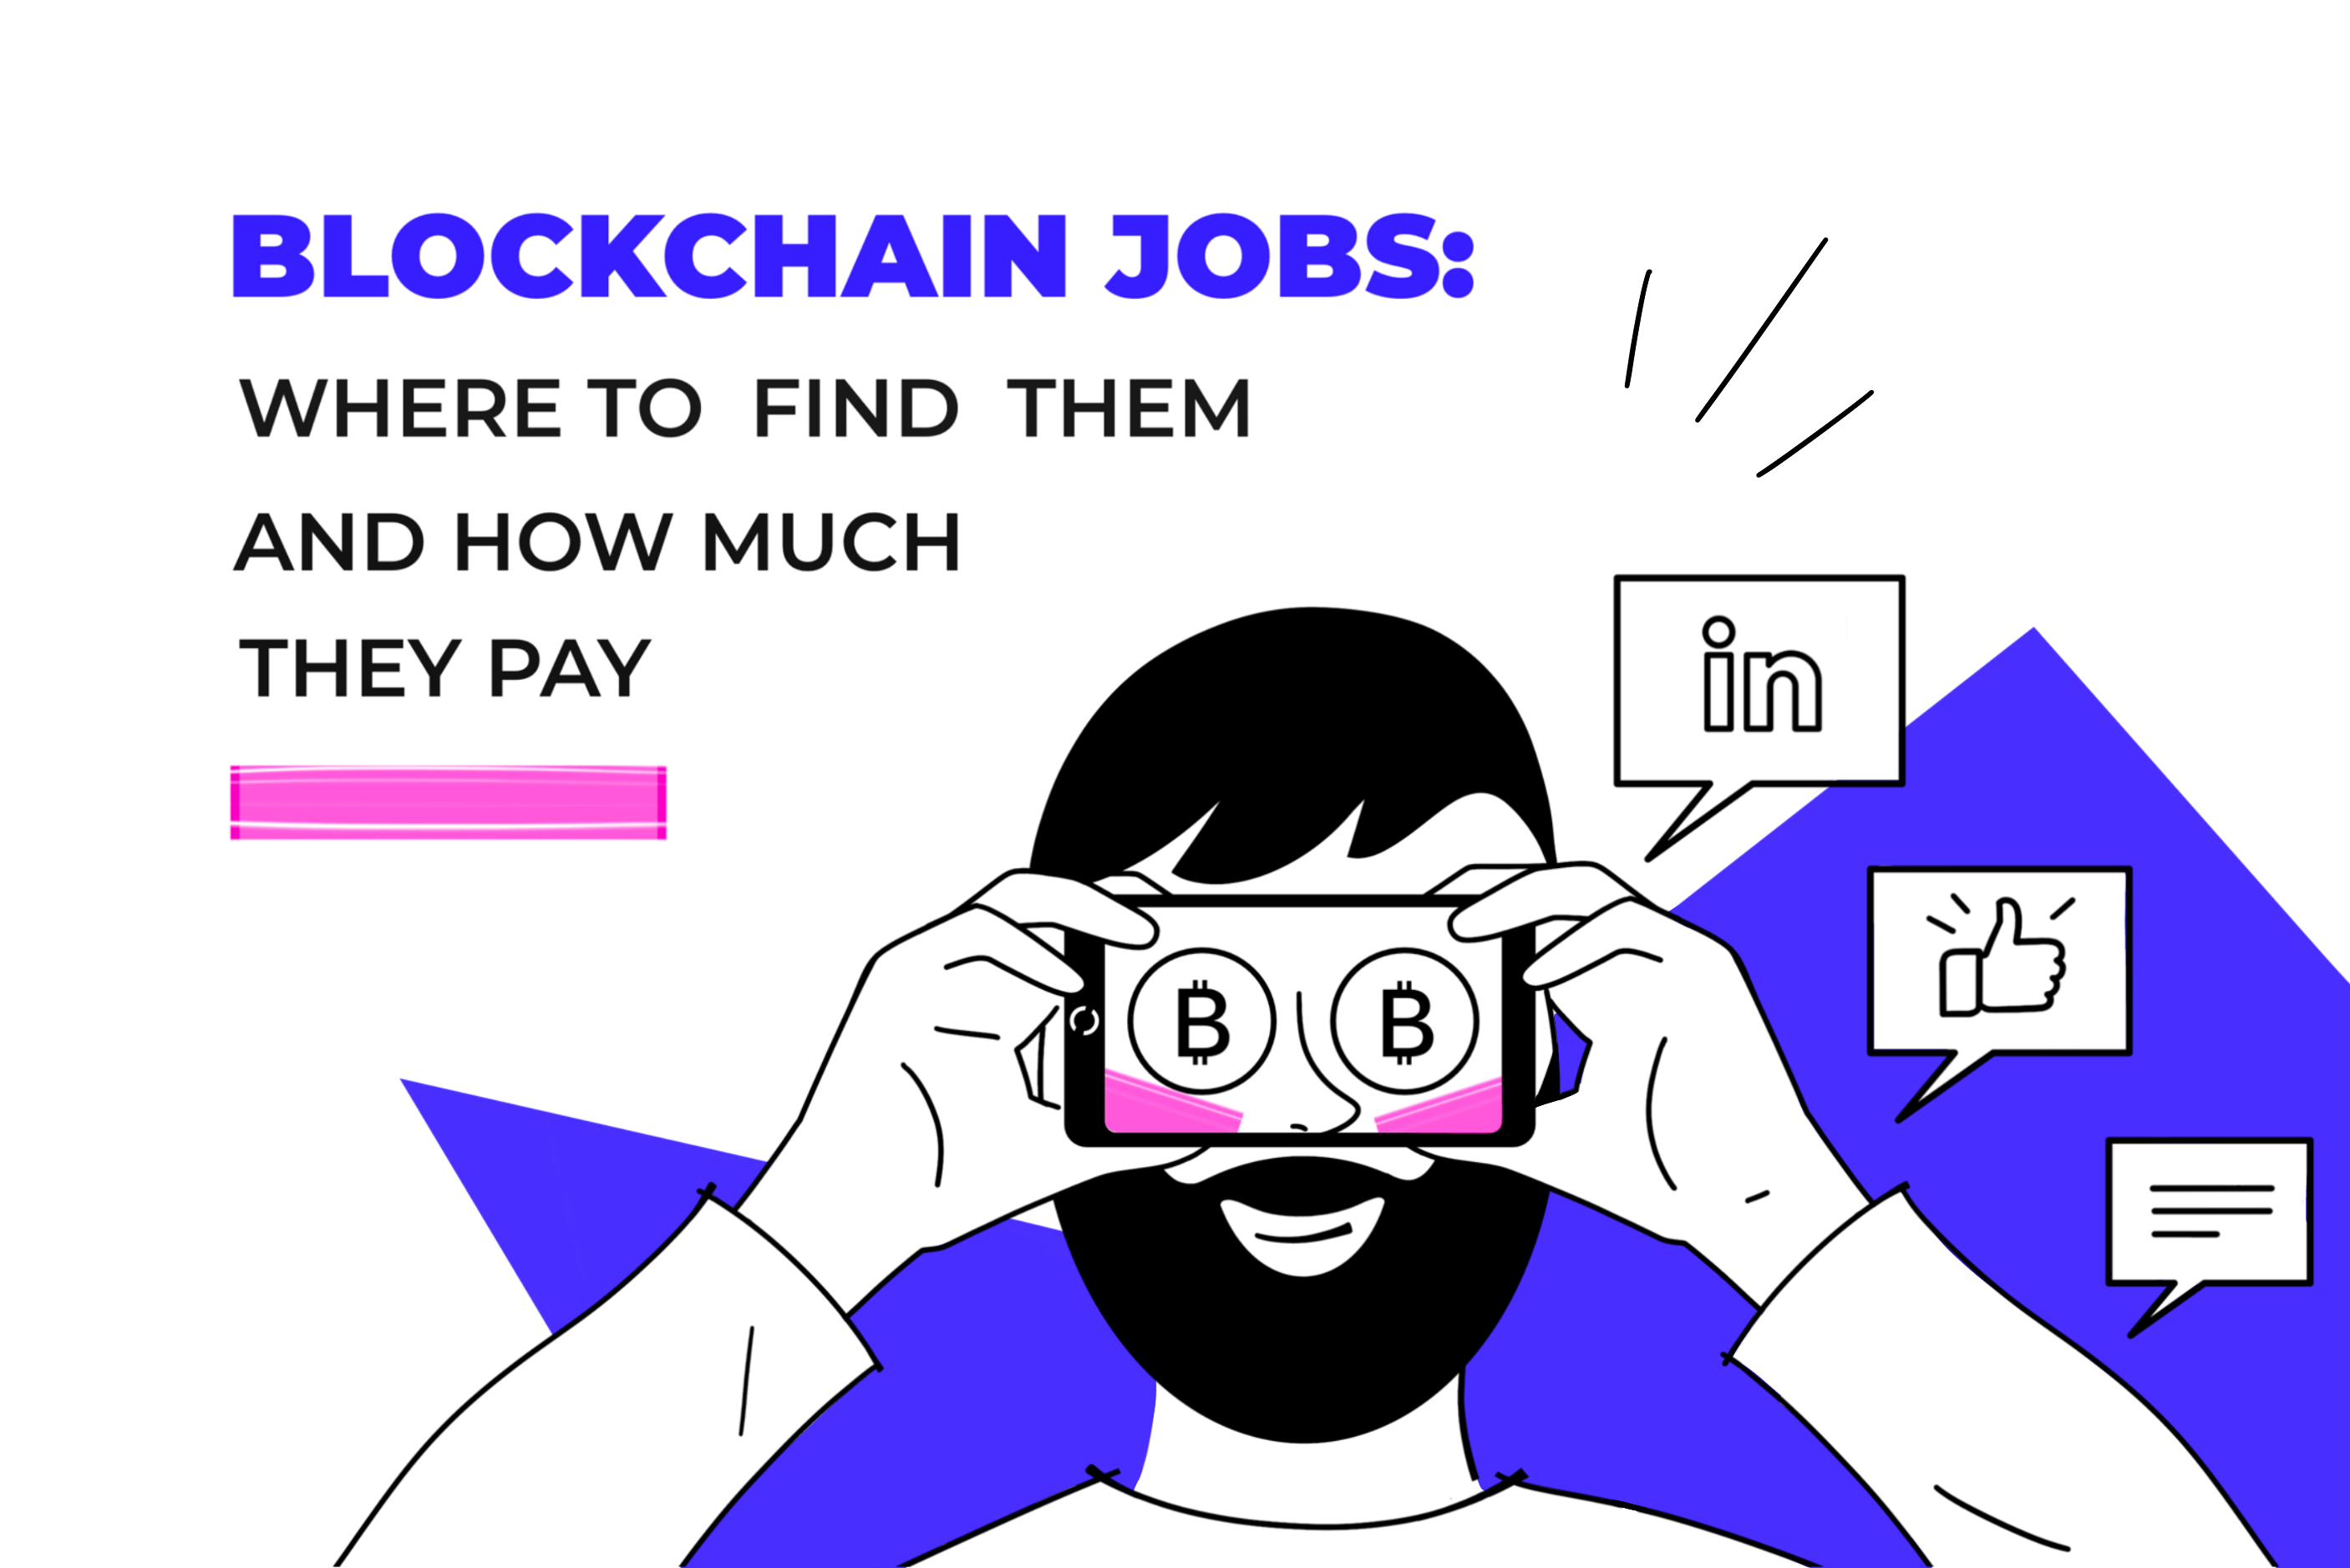 Blockchain jobs: where to find them and how much they pay